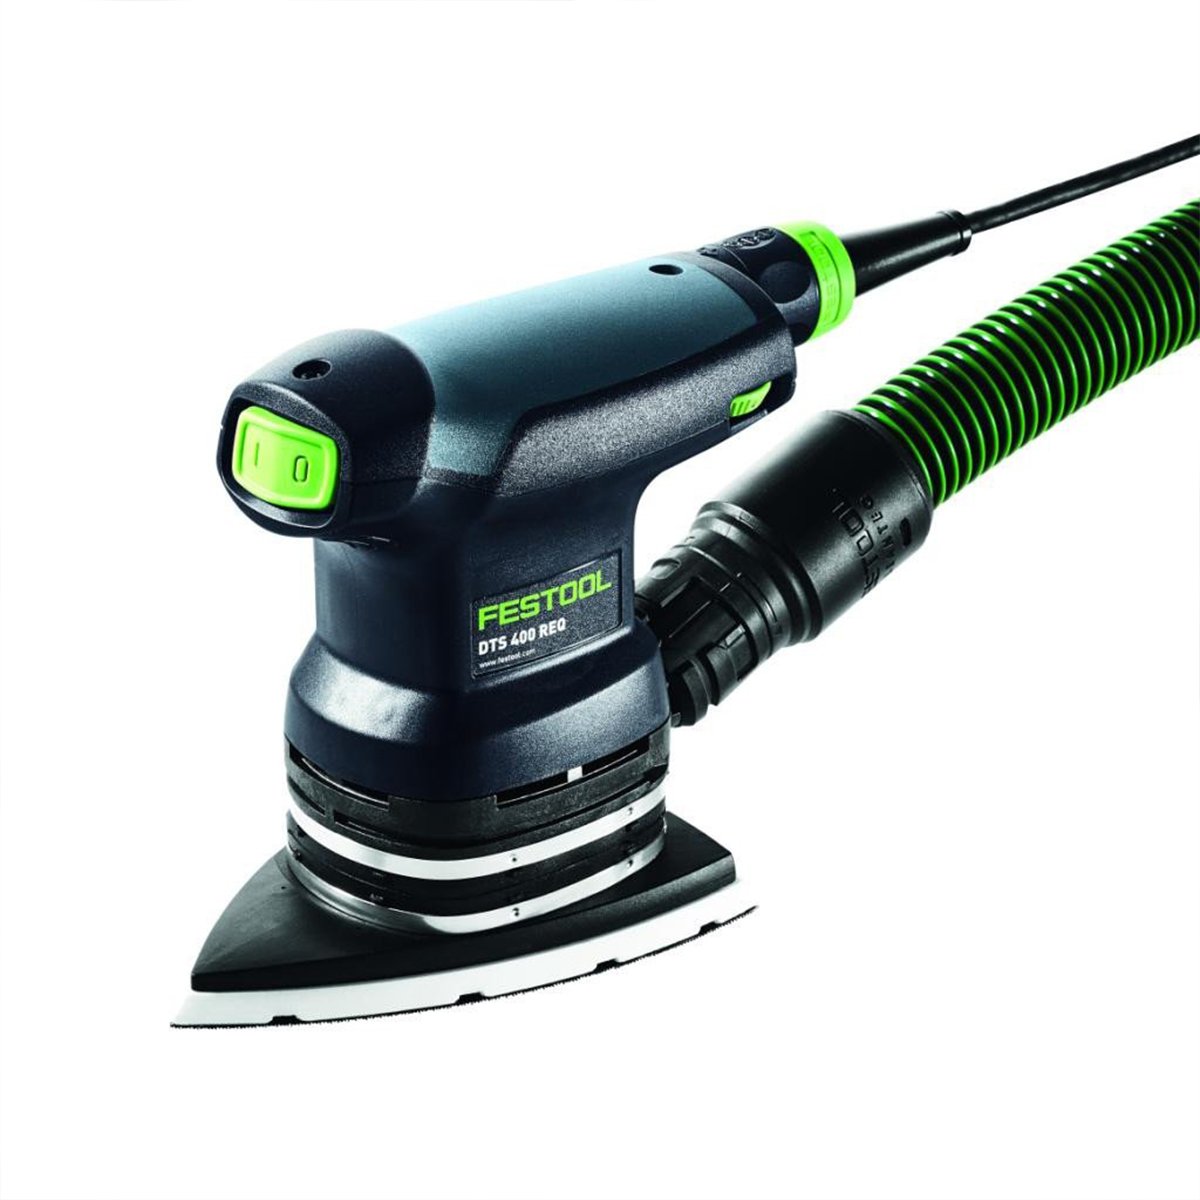 With a powerful 250 watt motor, the Festool DTS 400 REQ sander is an efficient sanding machine. Use with a dust bag or vacuum